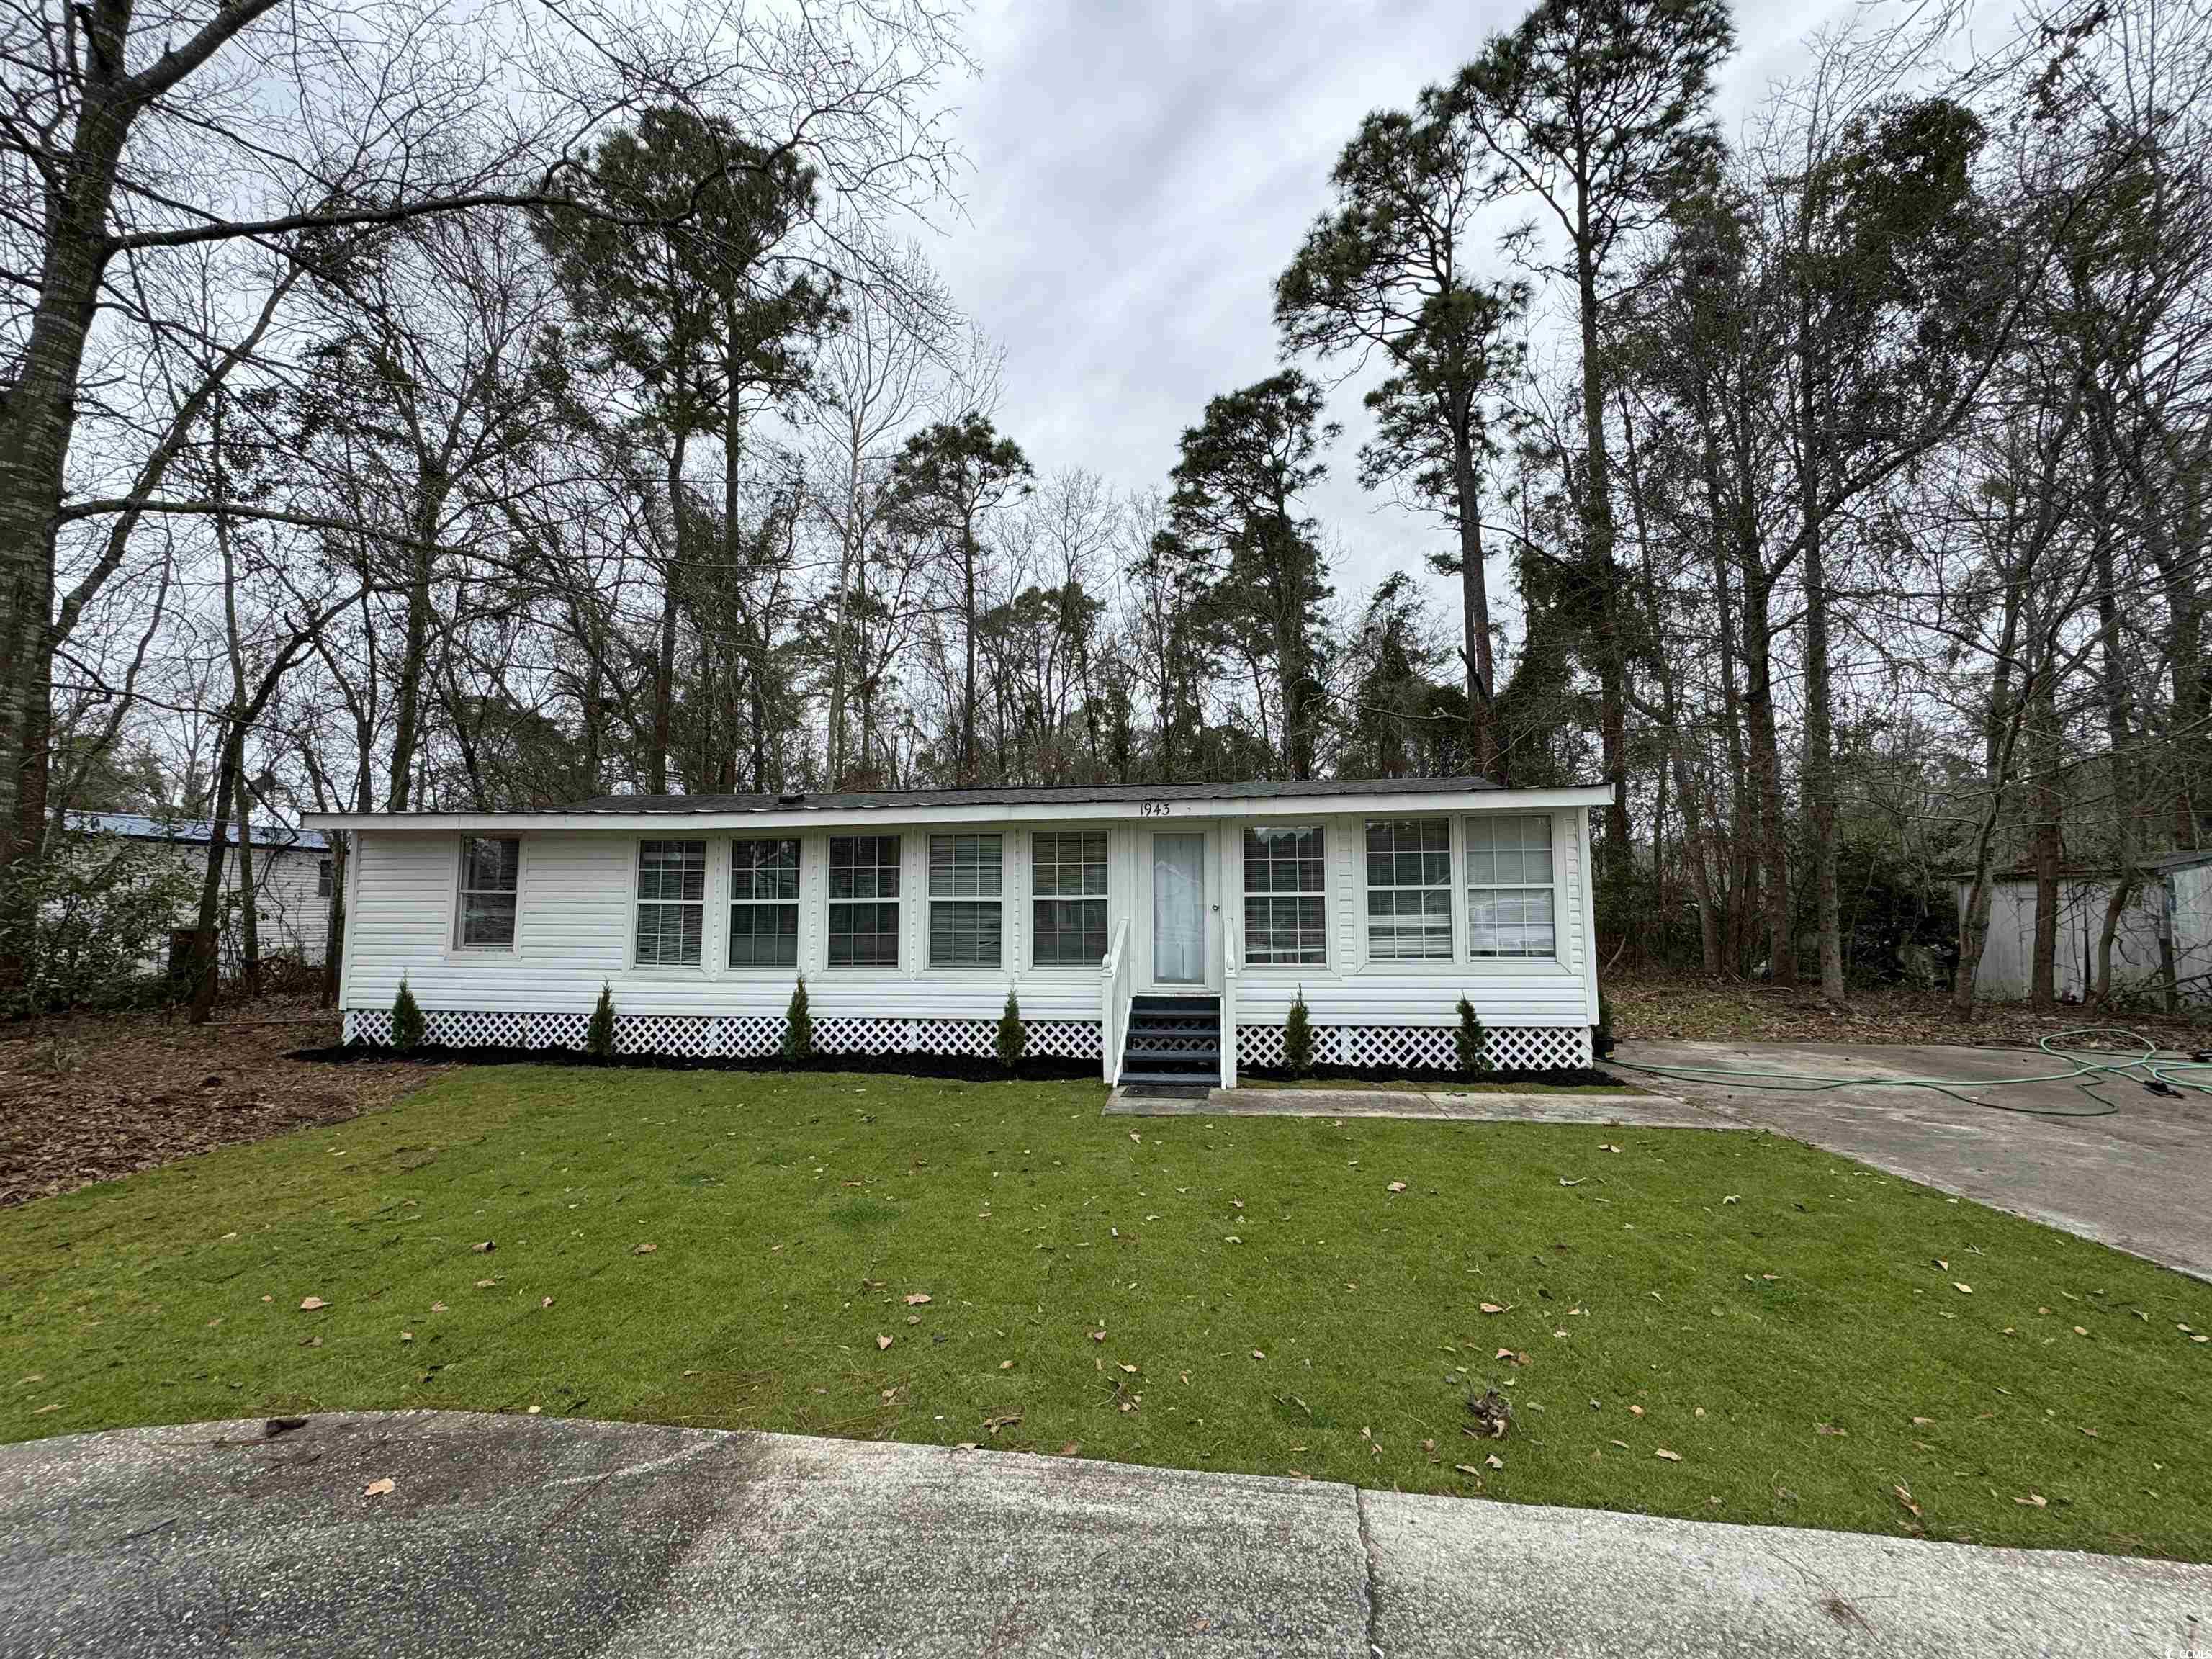 located close to downtown conway - this nicely "flipped" single wide features beautiful front yard, large enclosed front porch (34'x7'6"), split bedroom floor plan, outdoor storage building, new paint, new flooring and new bath. .36 acre lot and no hoa